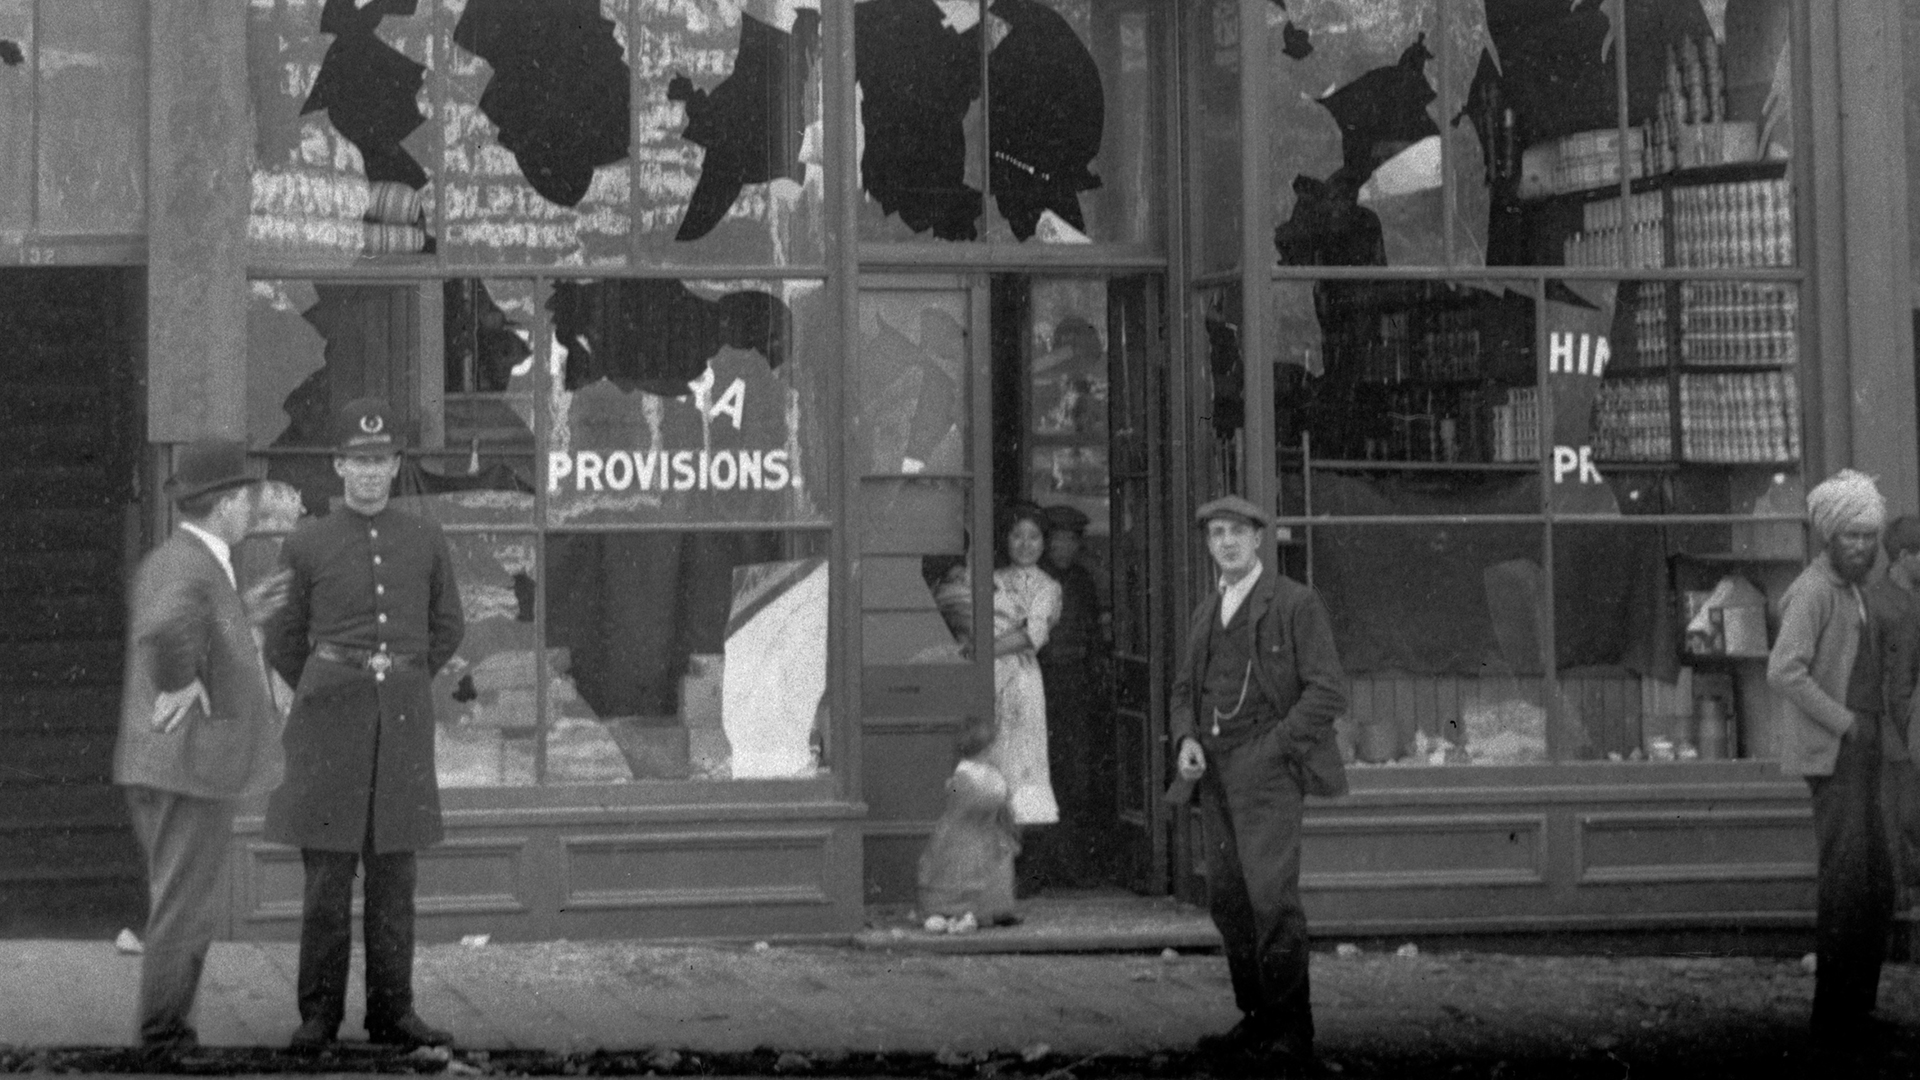 Following the Vancouver anti-Asian riot in September 1907, the storefront of Nishimura Masuya’s grocery store is damaged with shattered windows. Onlookers include a police officer, an Asian woman in the doorway of the store, and a South Asian man.